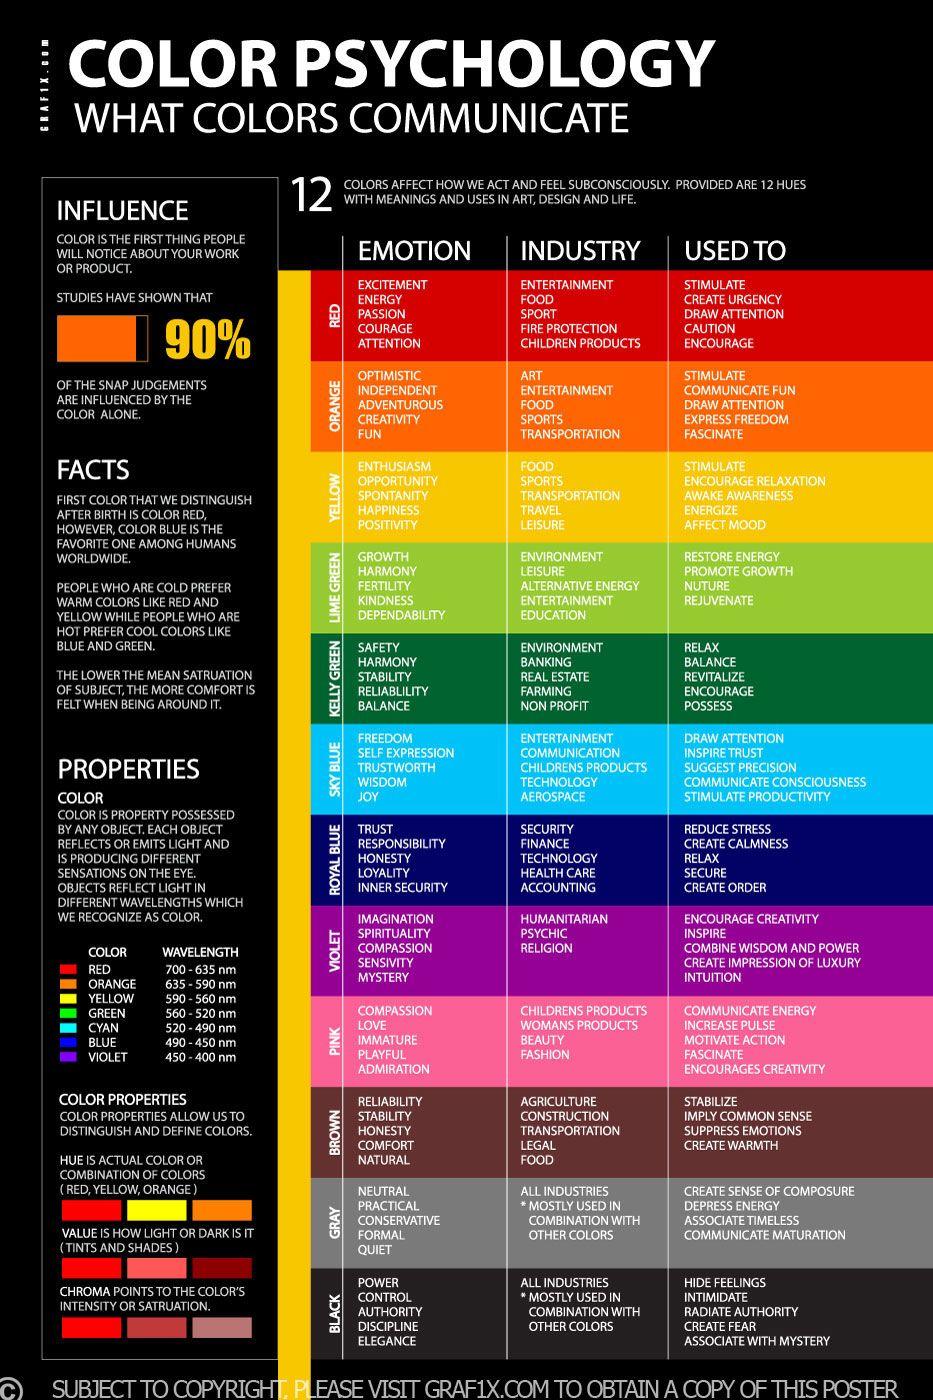 Red Blue Orange Logo - Color Meaning and Psychology of Red, Blue, Green, Yellow, Orange ...